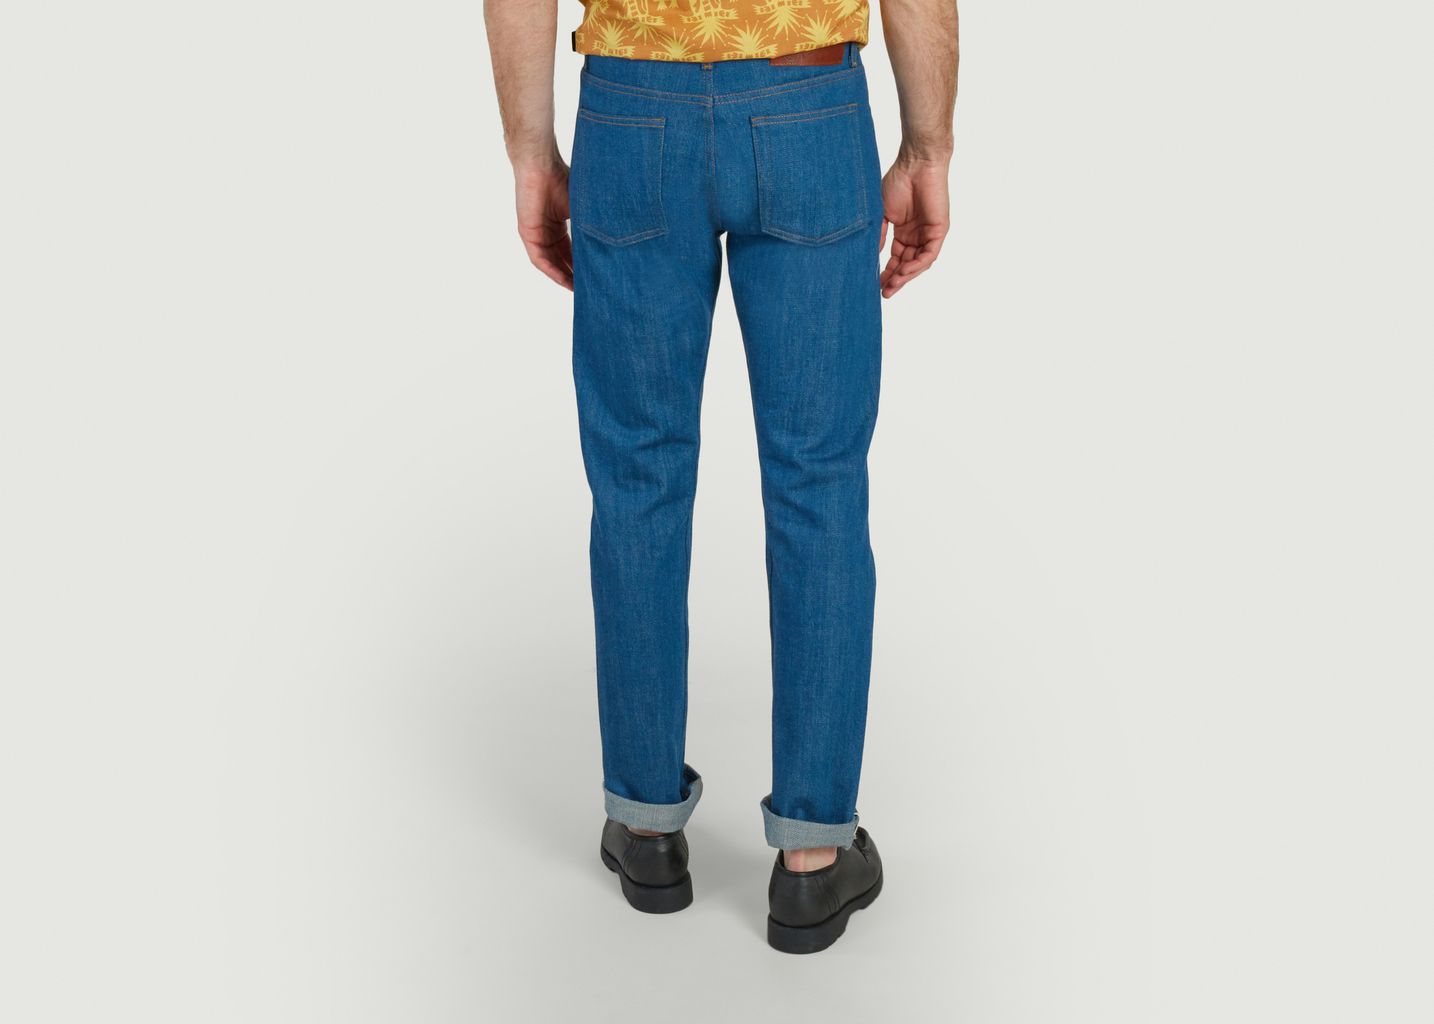 Jeans Weird Guy Oceans Edge Selvedge - Naked and Famous